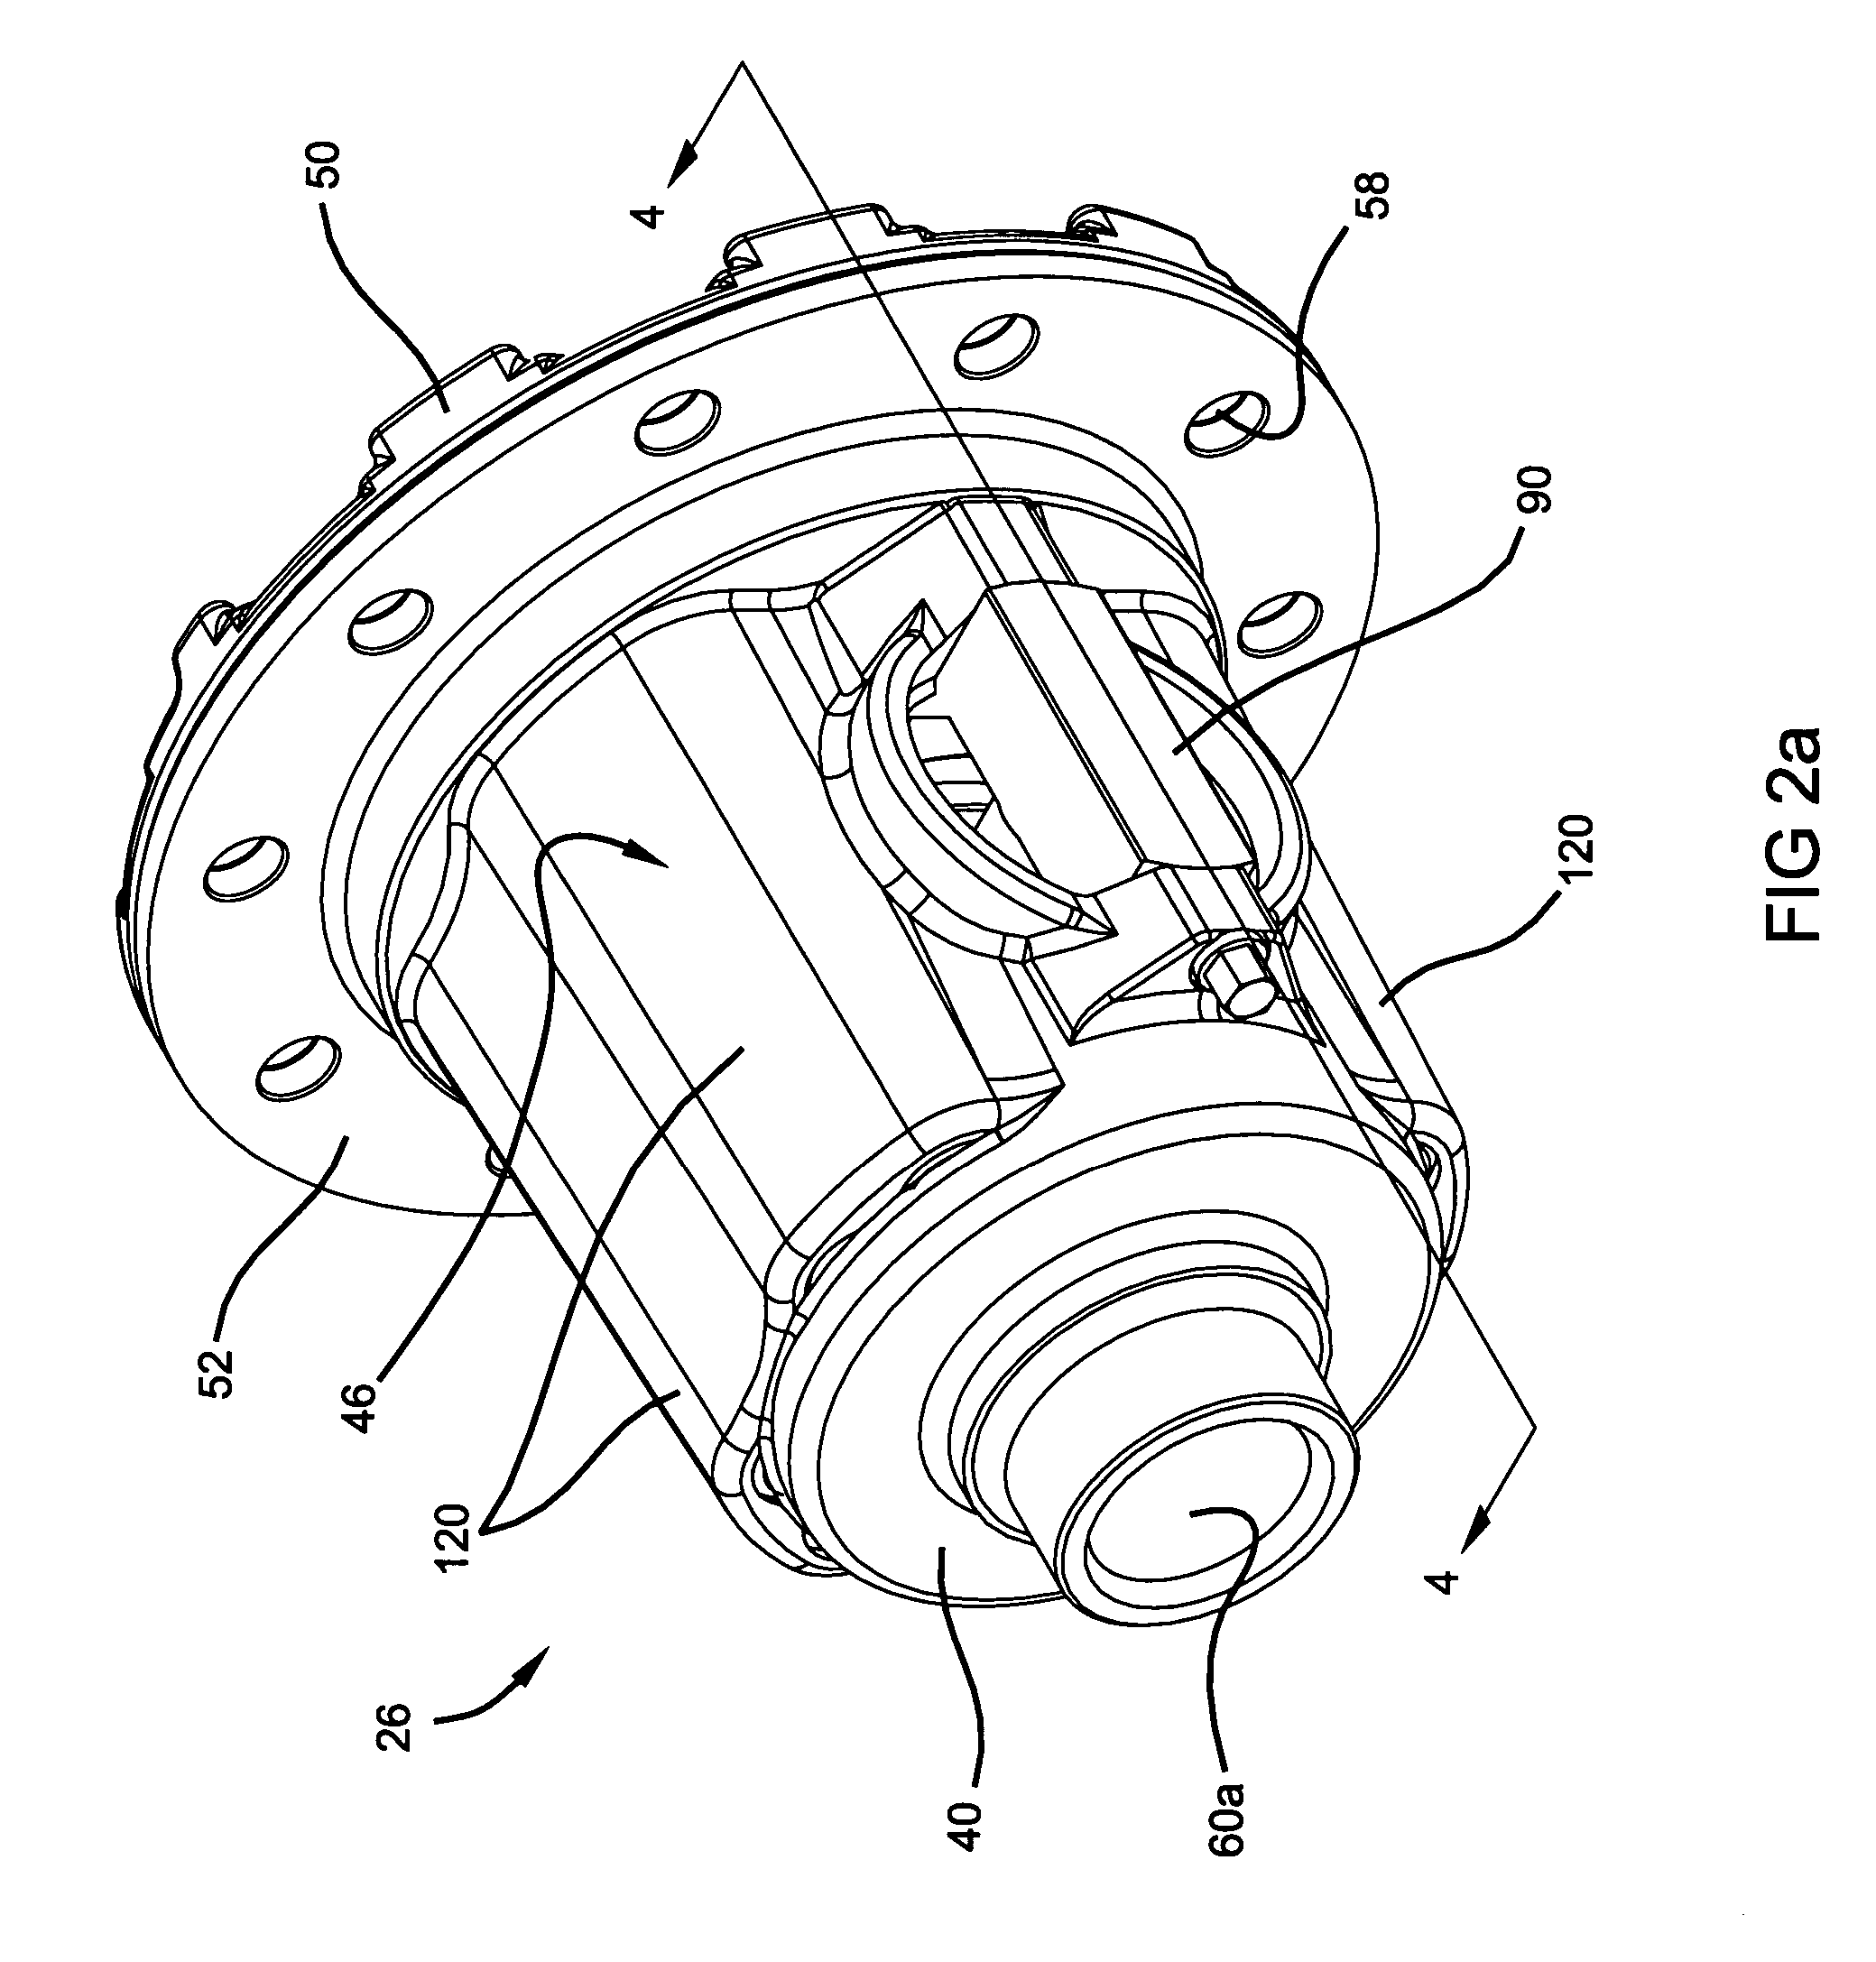 Helical gear differential